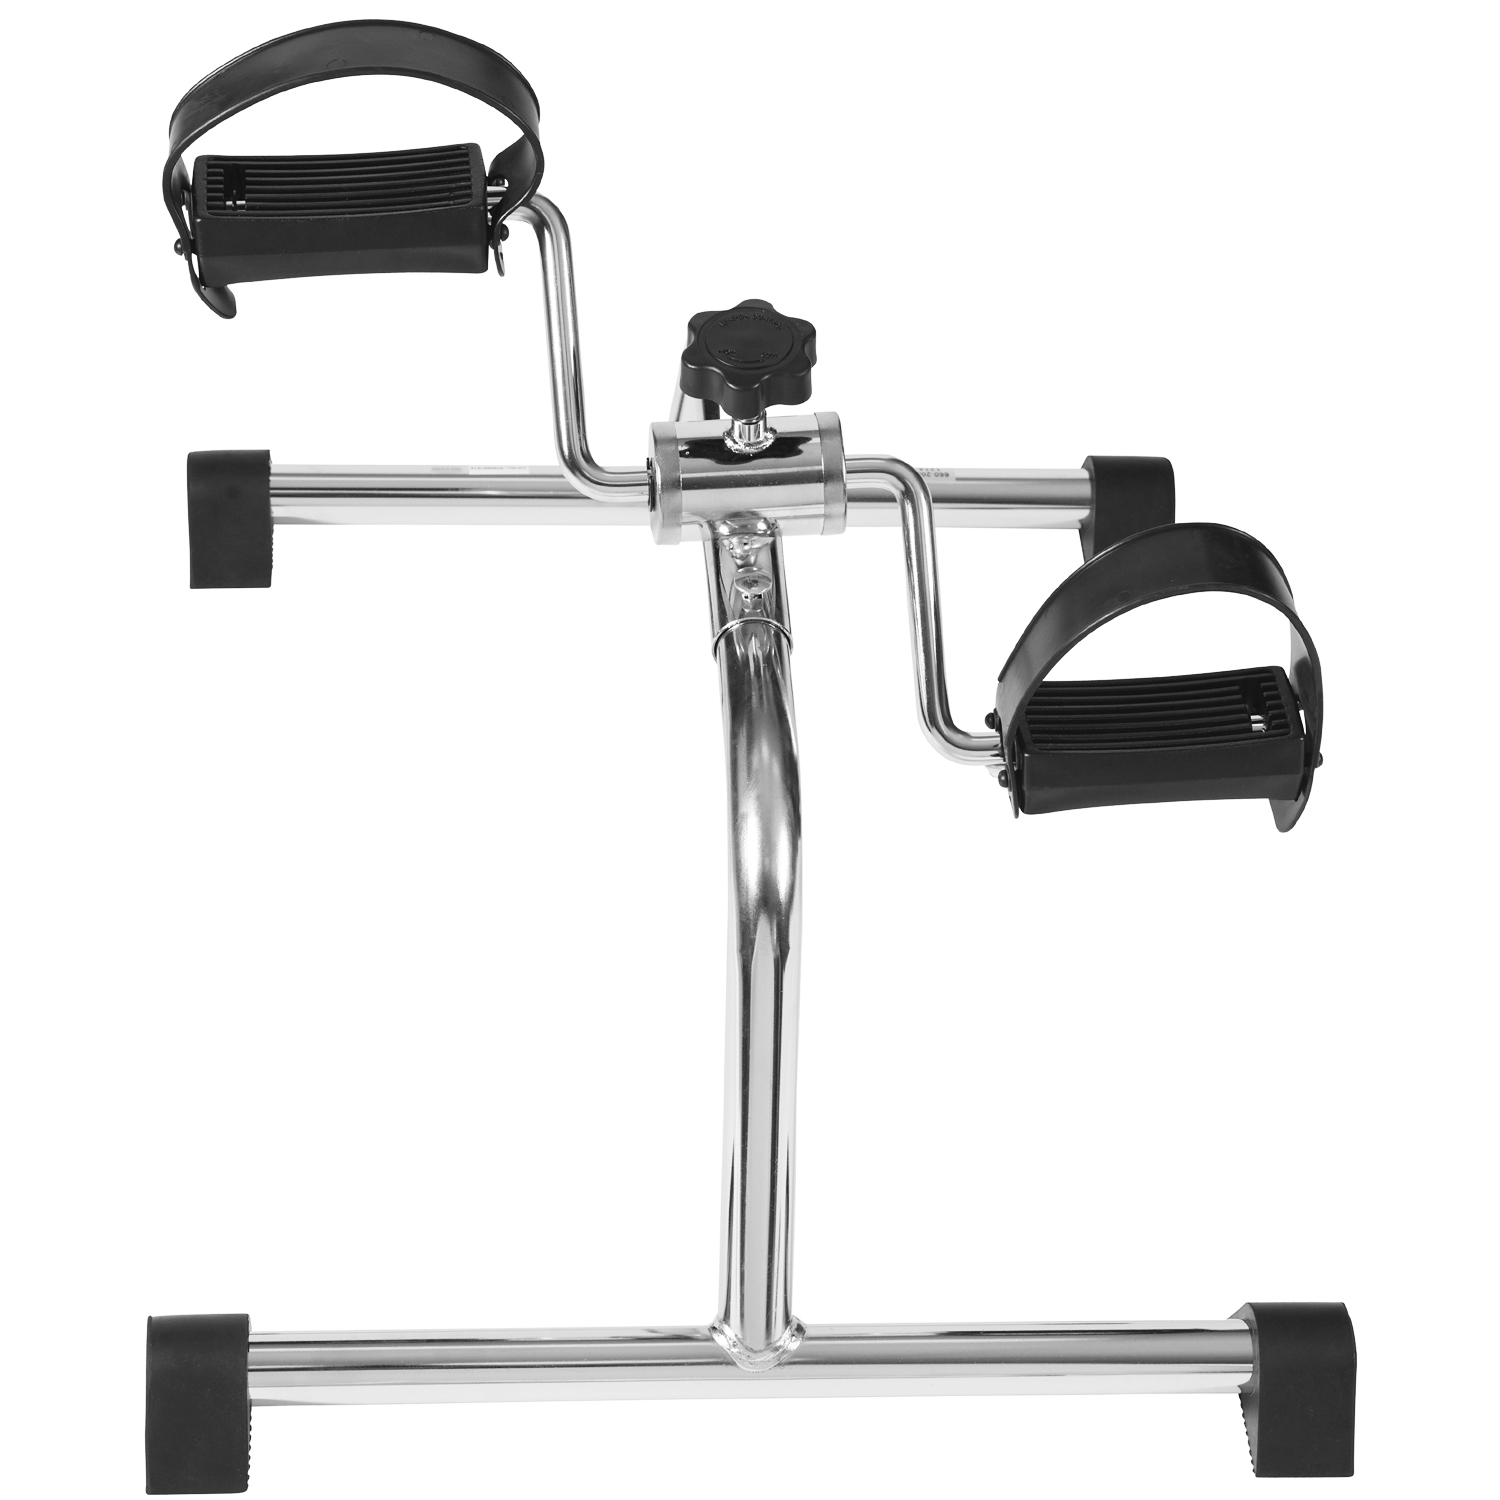 DMI Lightweight Mini Pedal Exerciser for Arms and Legs - image 5 of 5